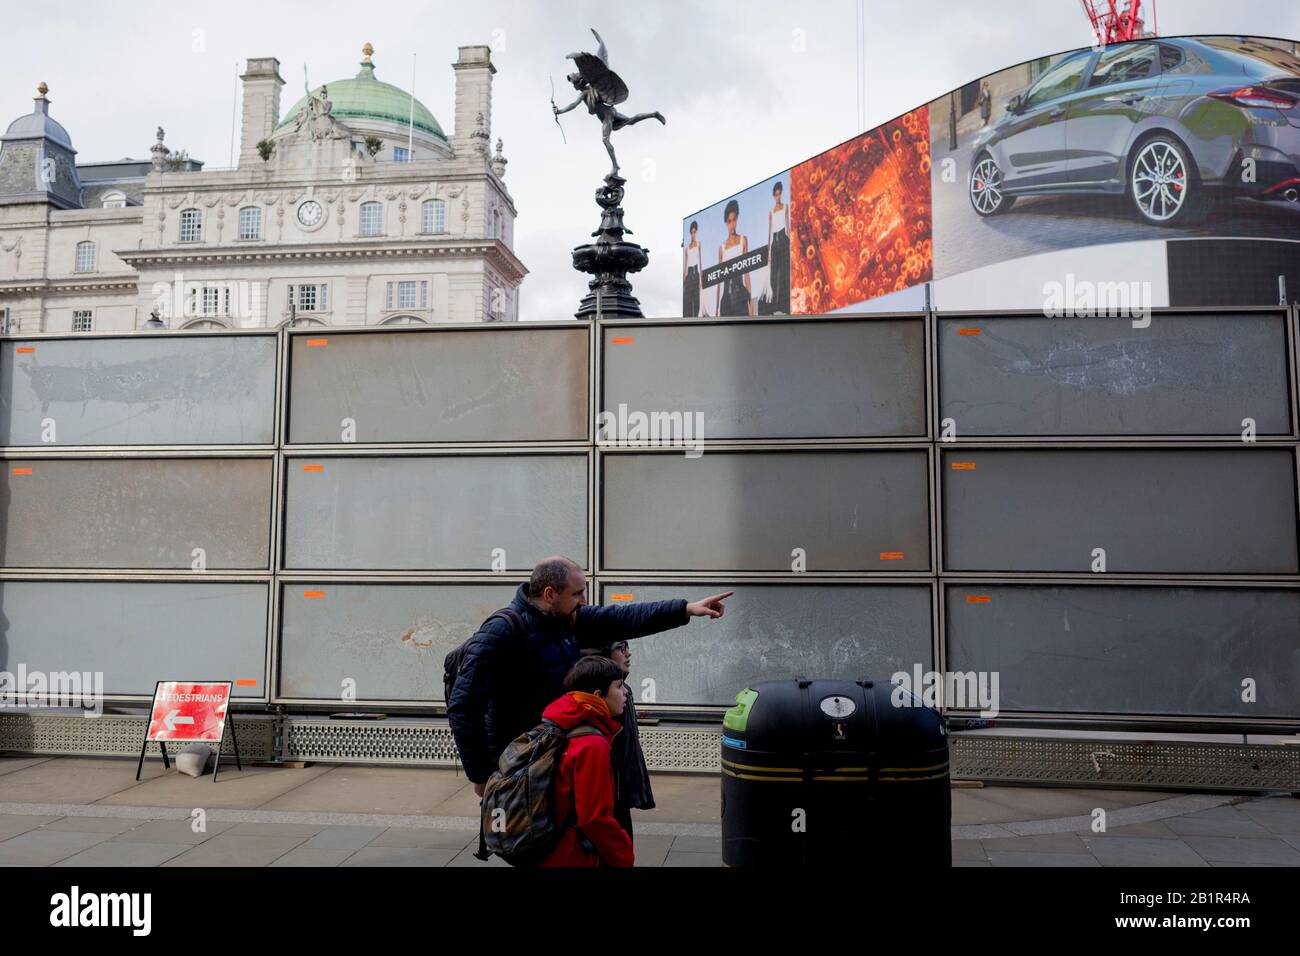 An adult points out a London site next to a temporary construction hoarding beneath the partially hidden statue of the world famous London Victorian-era landmark, Eros in Piccadilly Circus, on 25th February 2020, in London, England. Eros, or the Shaftesbury Memorial Fountain is located at the southeastern side of Piccadilly Circus in London, United Kingdom. Moved after World War II from its original position in the centre, it was erected in 1892–1893 to commemorate the philanthropic works of Lord Shaftesbury, who was a famous Victorian politician and philanthropist. The monument is surmounted Stock Photo